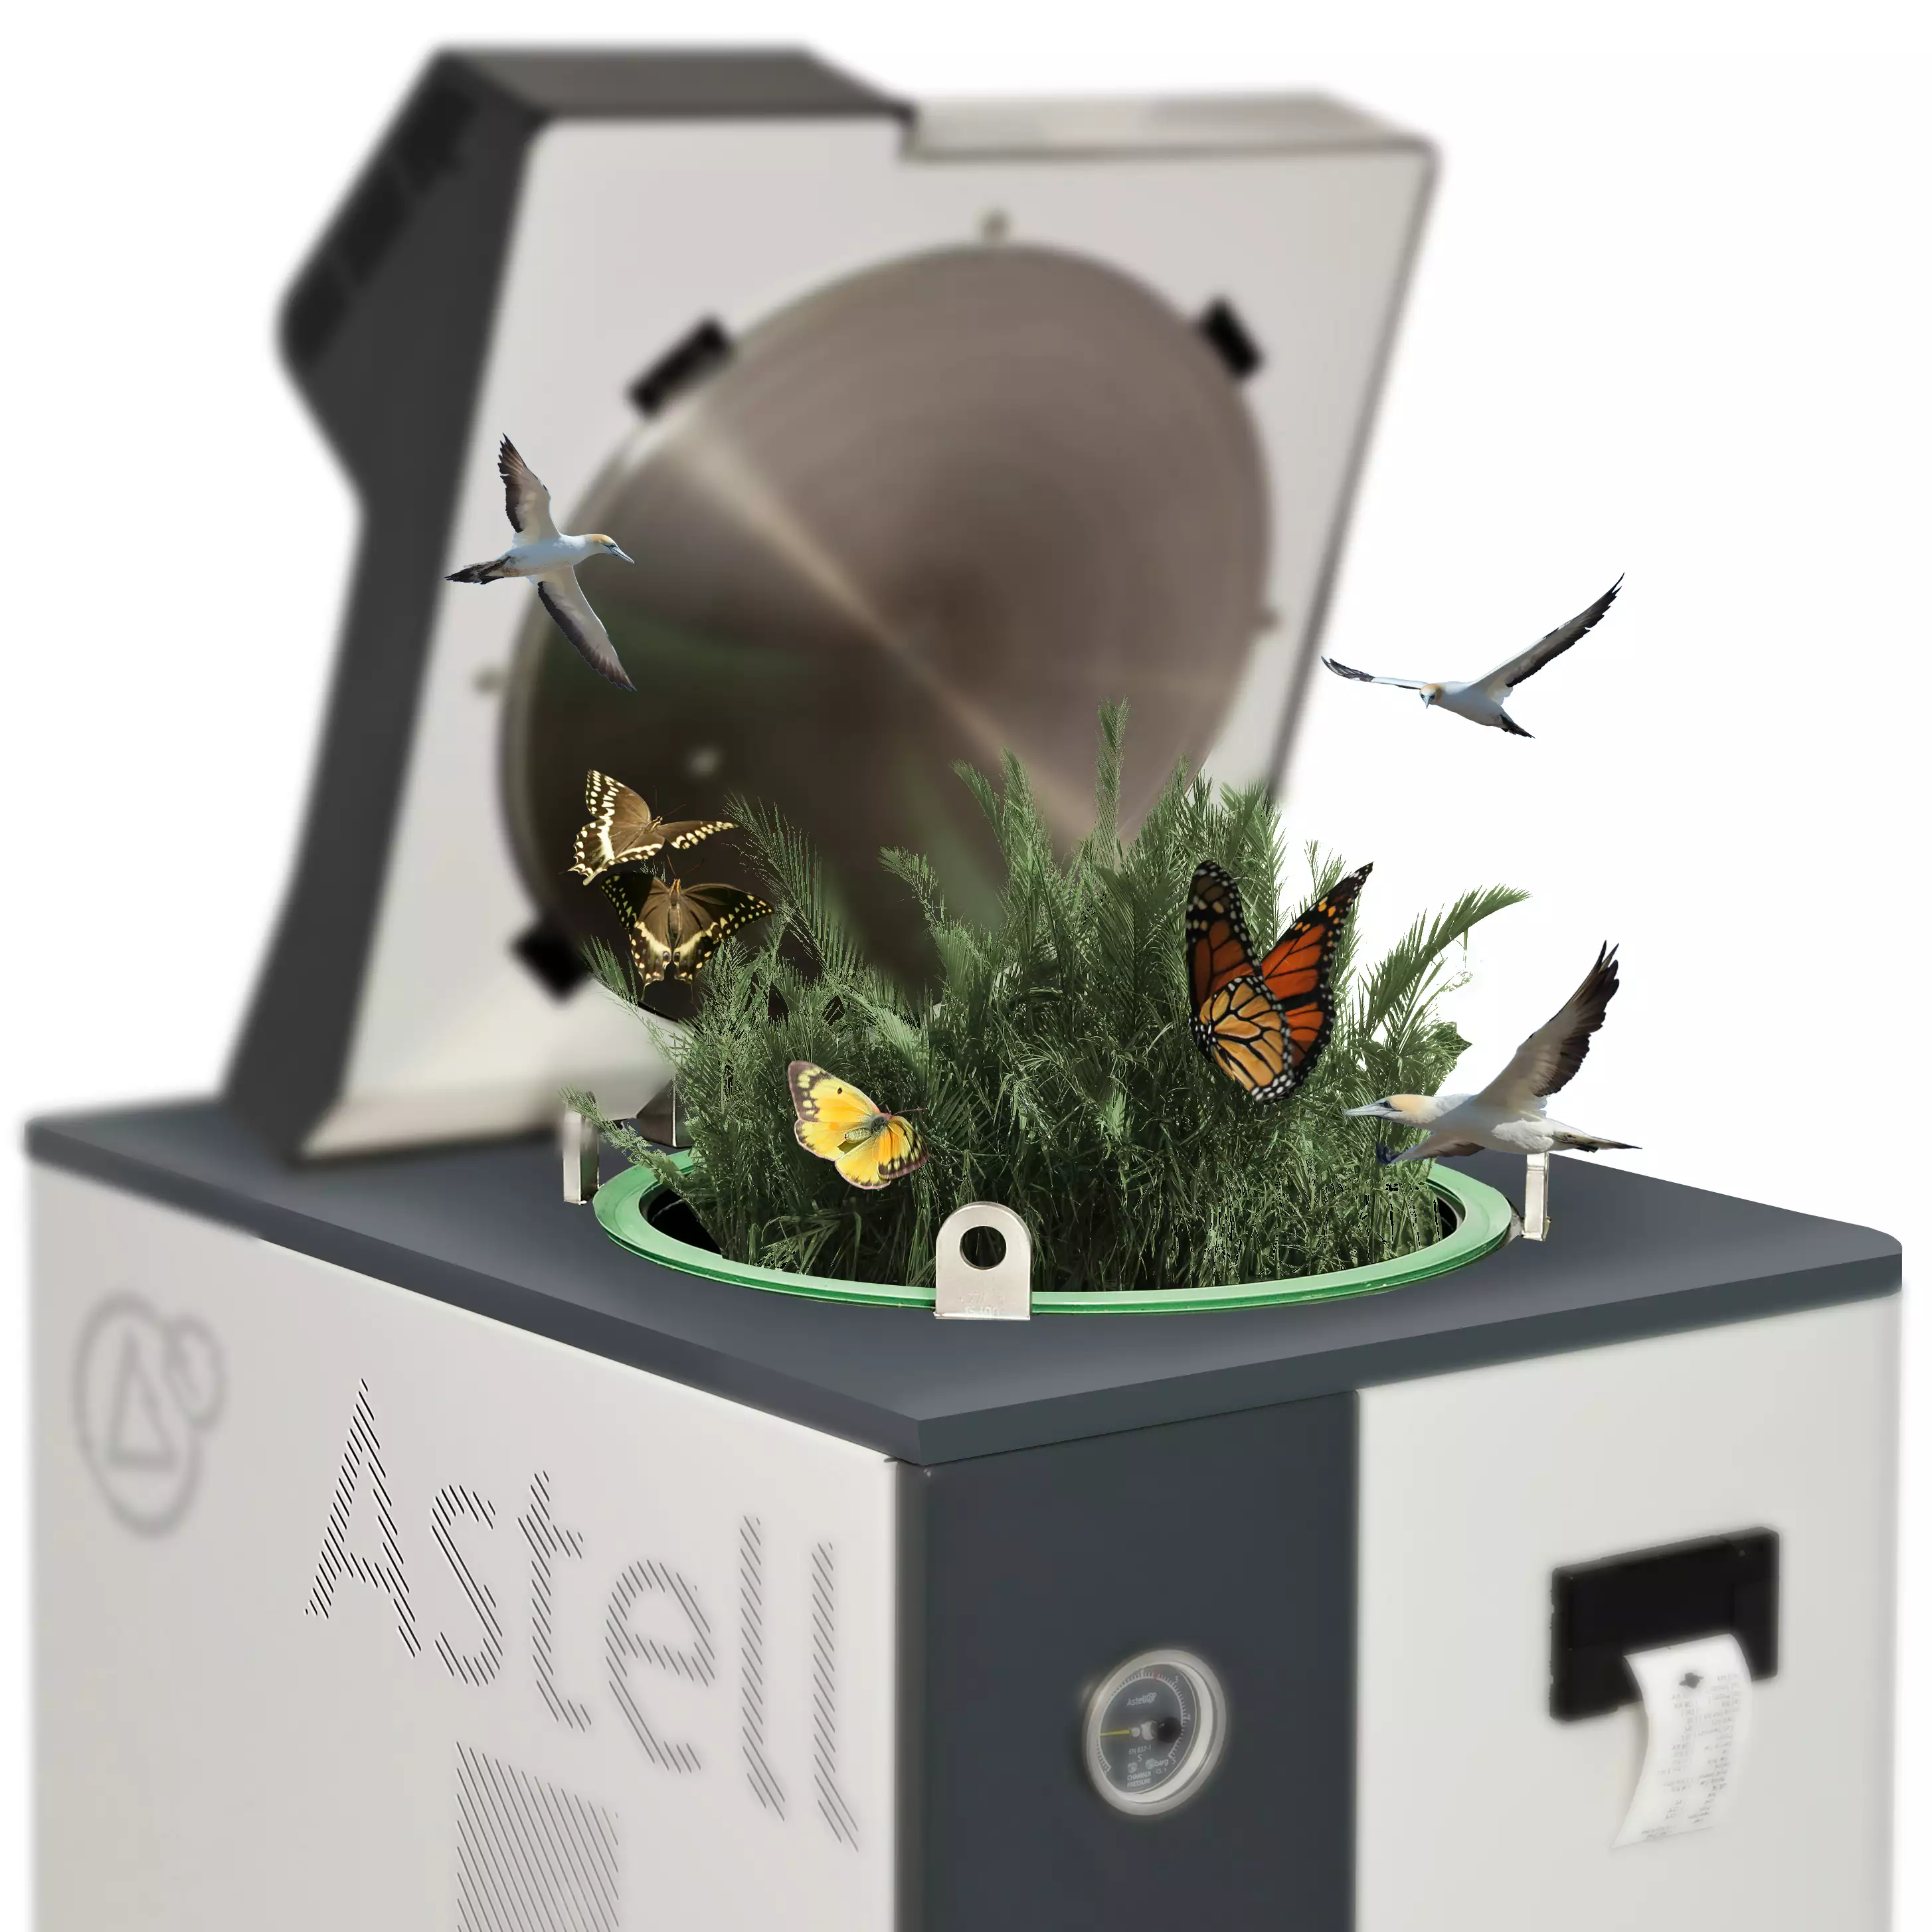 Convenient, Eco-friendly autoclaving from Astell